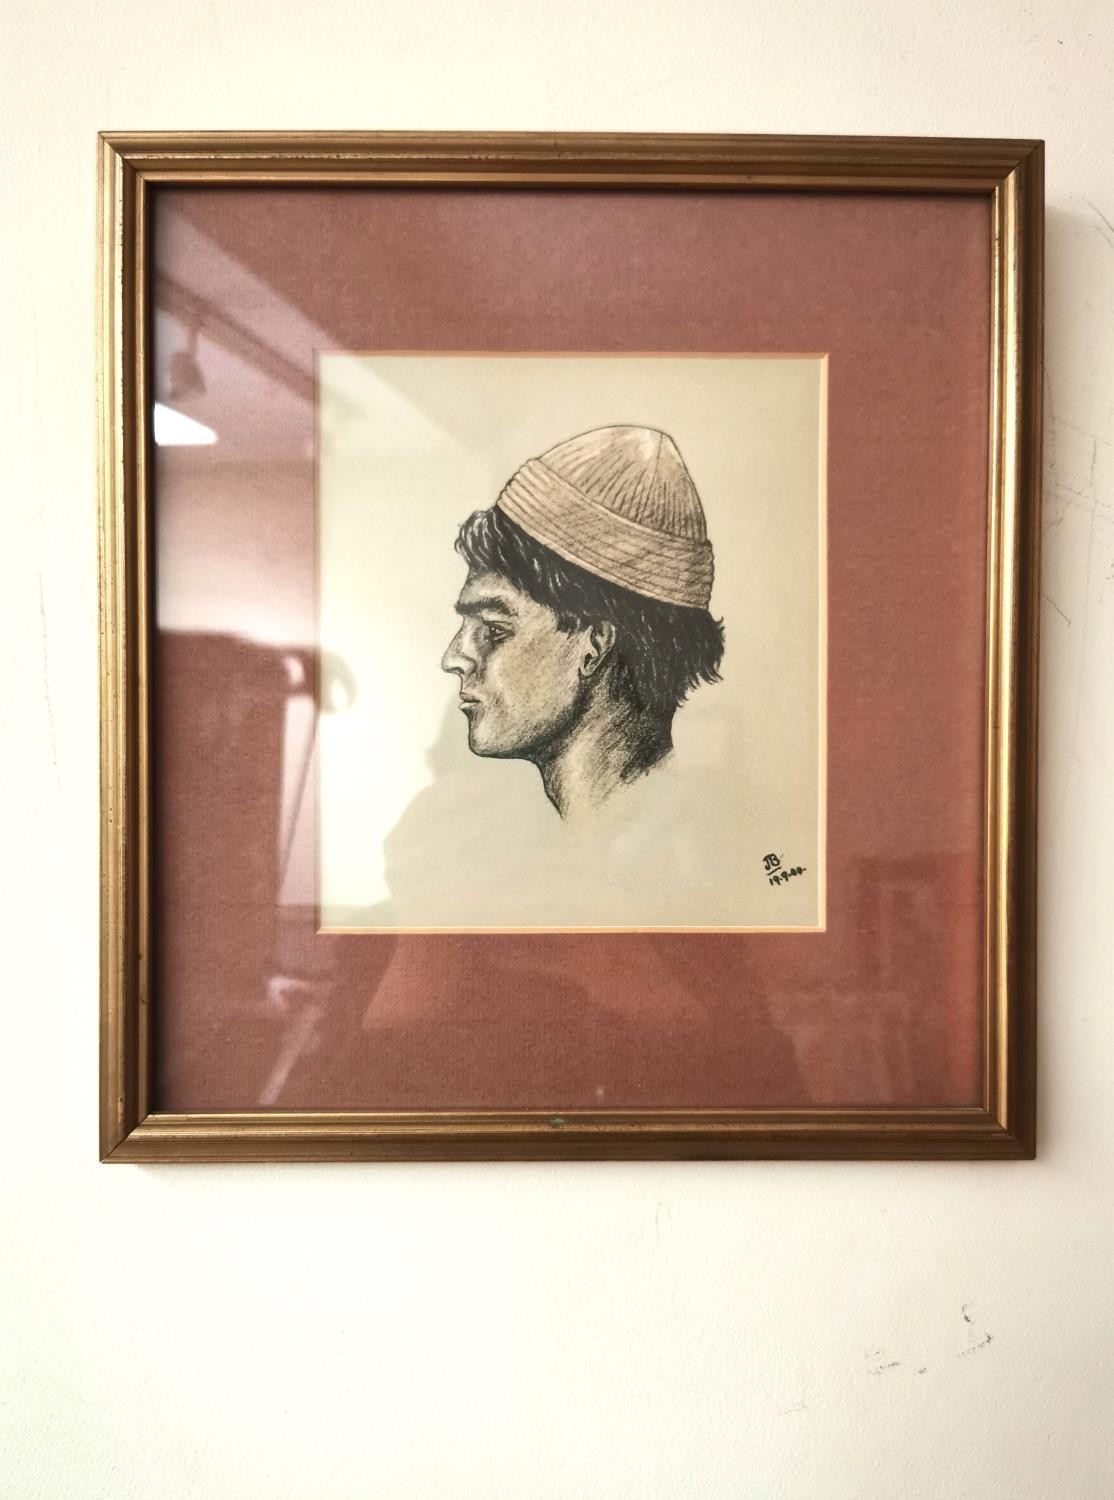 J. Bowen, artists proof lithograph of 'The boy in the red hat', from a series of drawings done while - Image 2 of 7